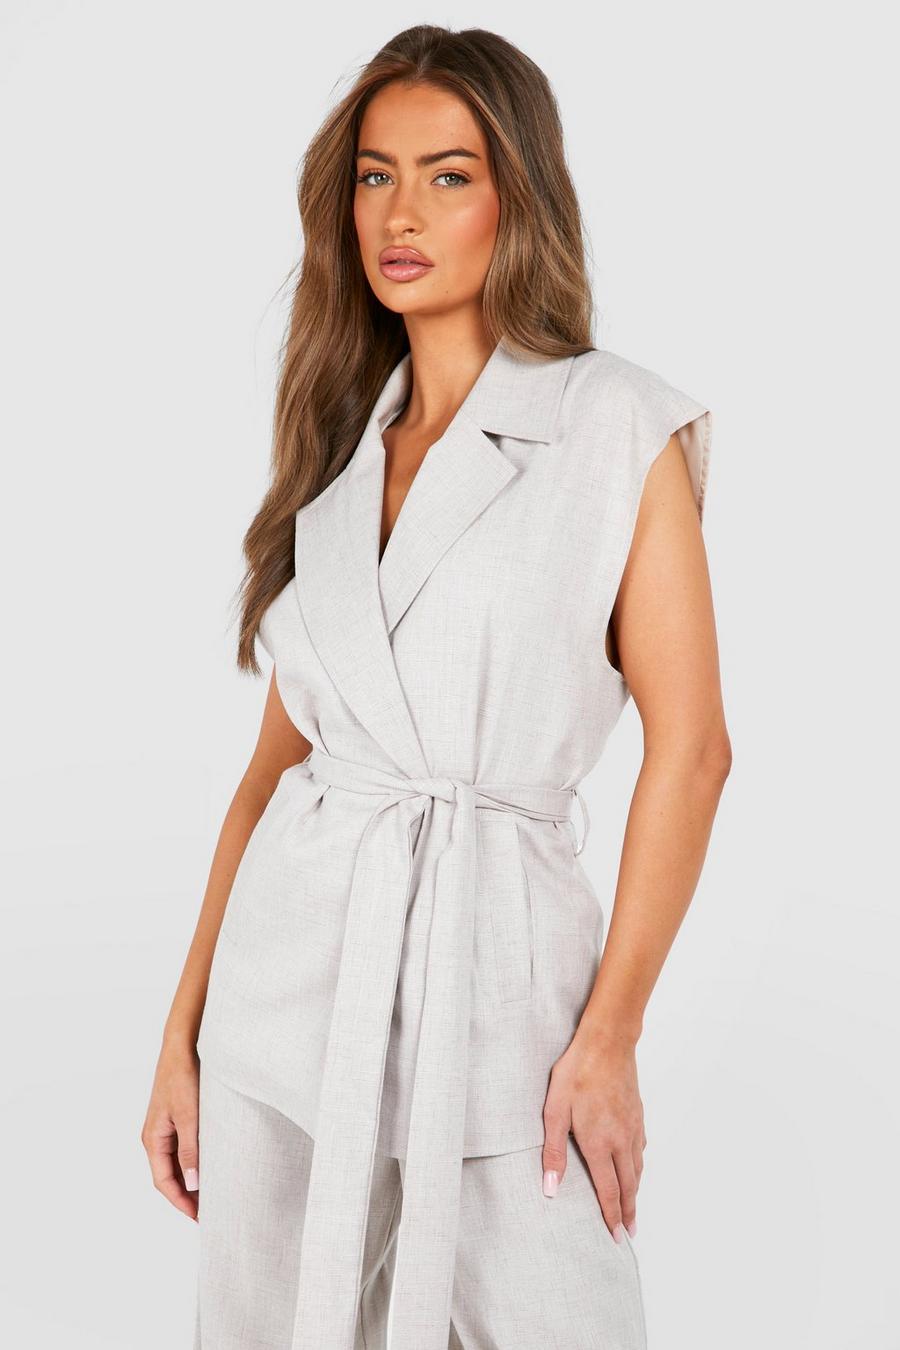 Taupe Linen Look Tie Waist Relaxed Fit Sleeveless Blazer